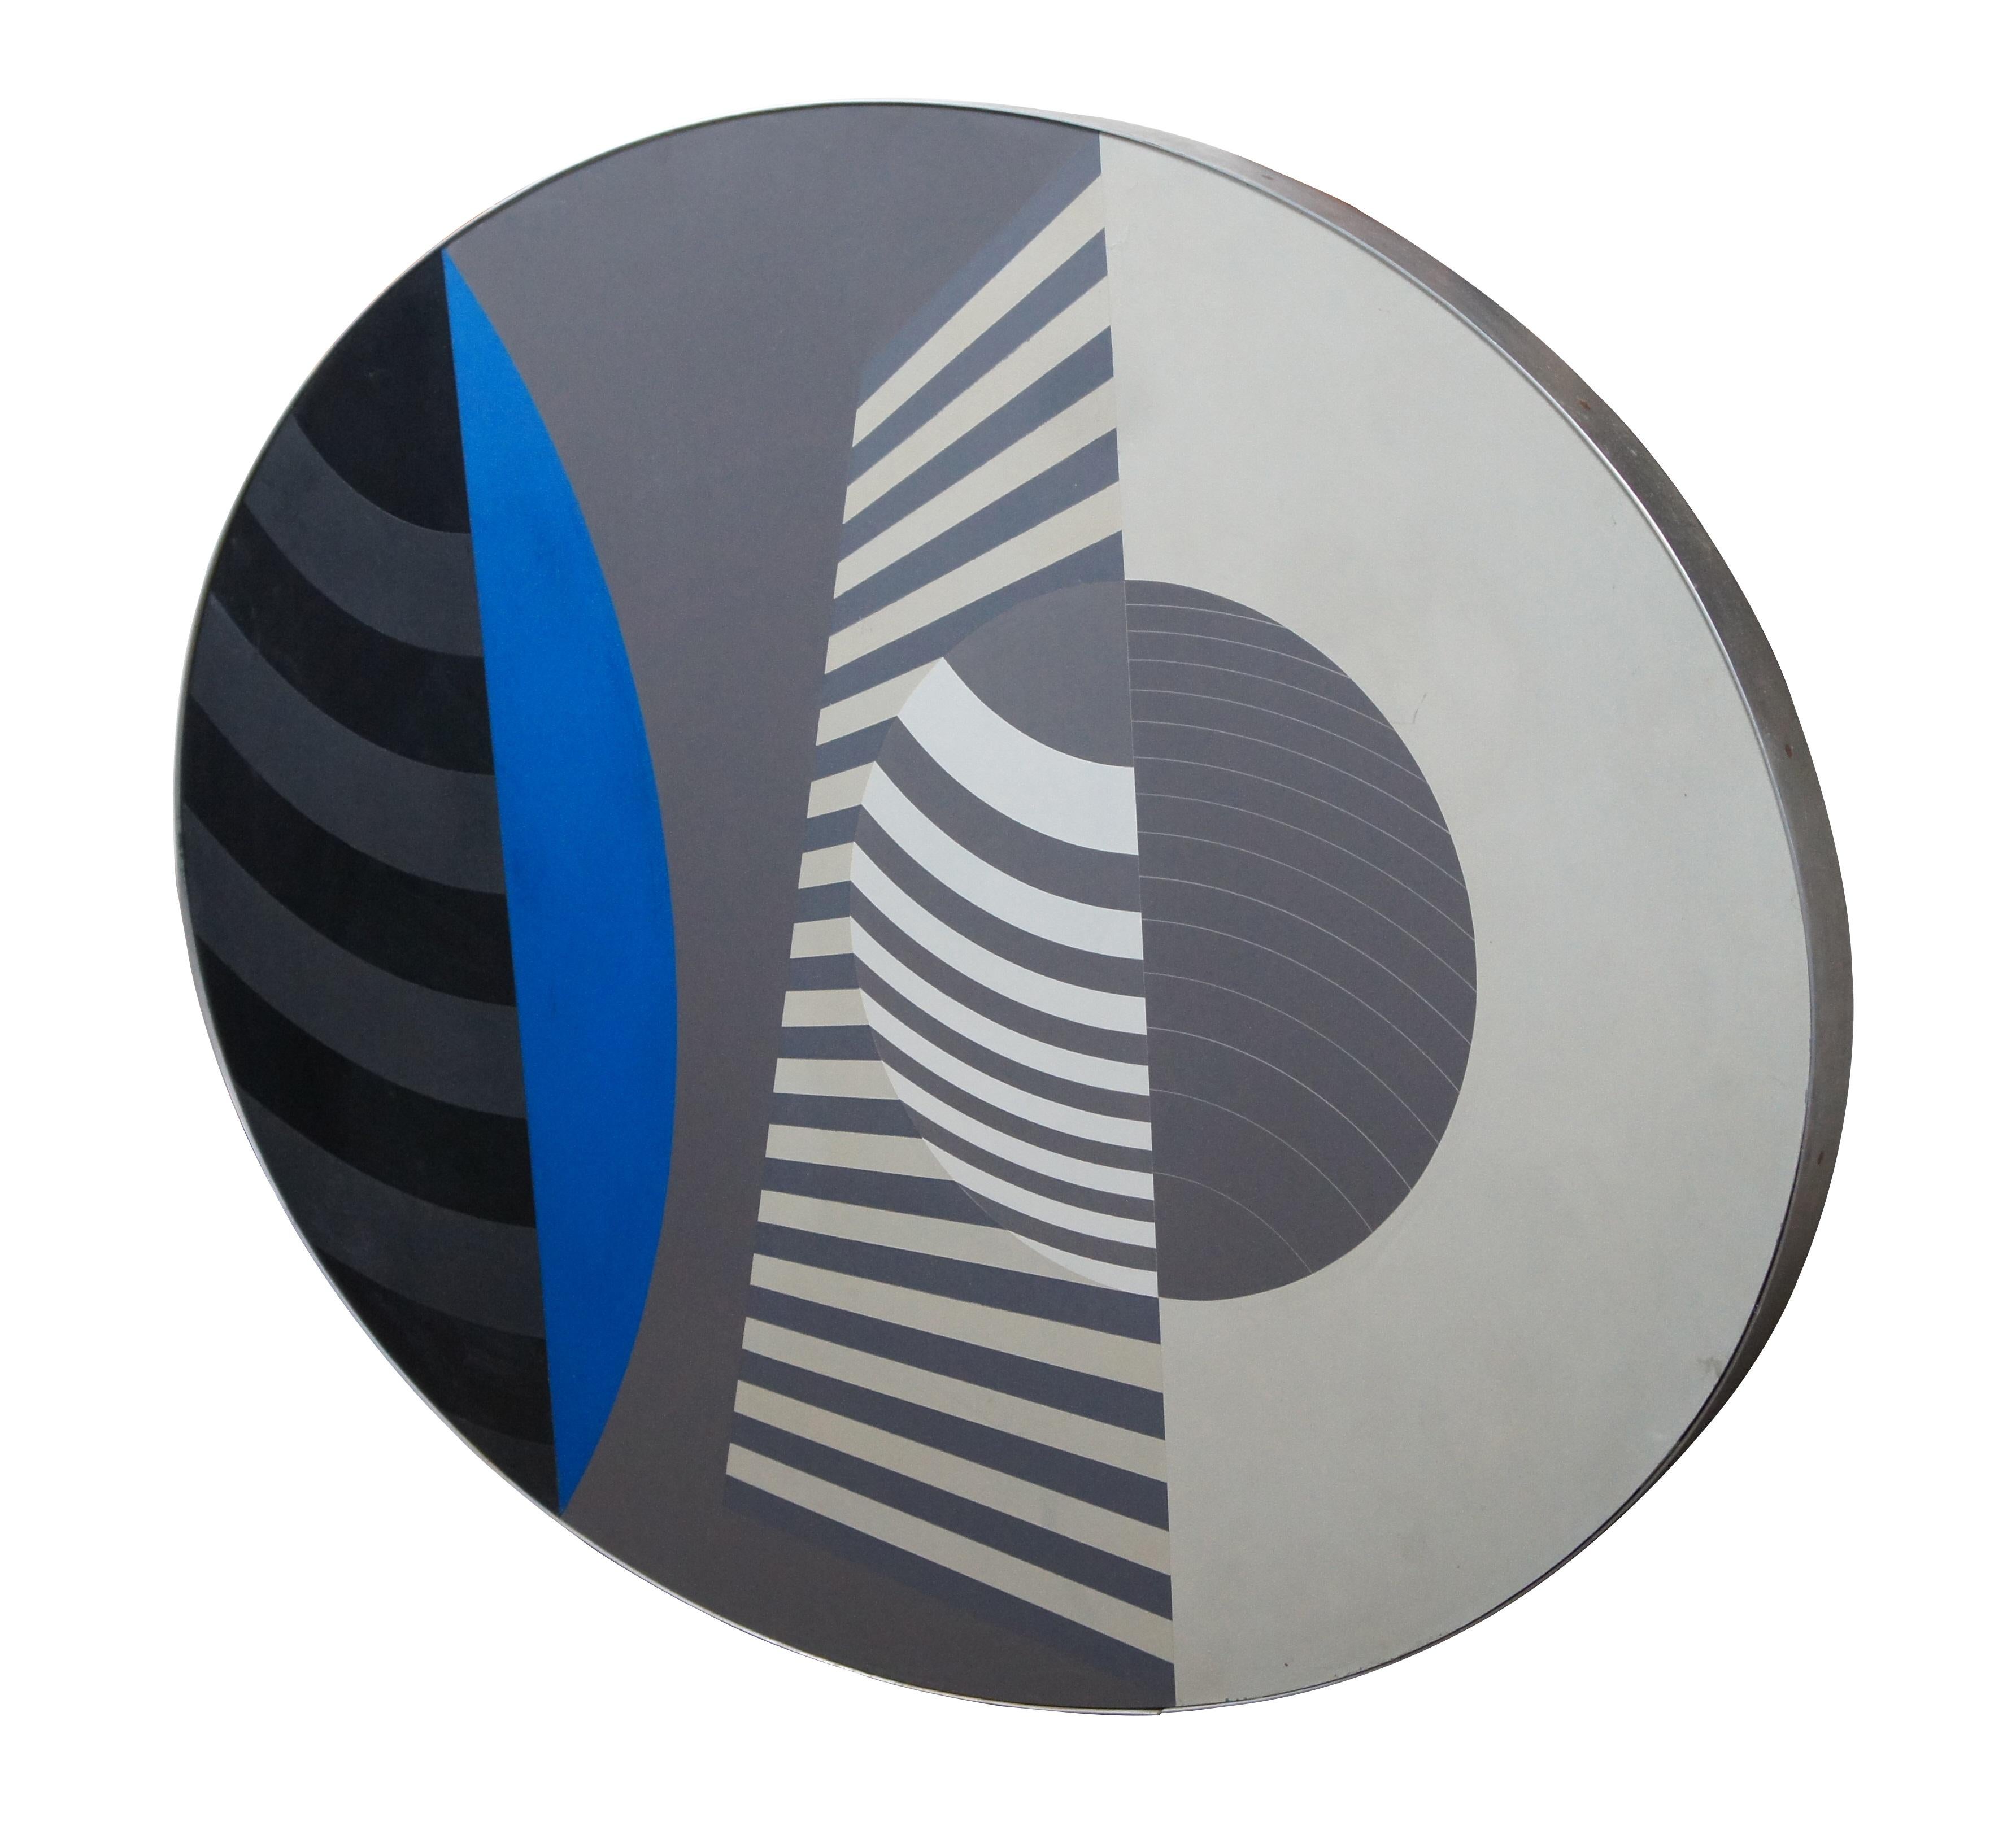 Donald Roberts mid century modern large oval abstract geometric formica sandblasted painting titled Aureole Project Azure March 1966. 

Donald Roberts b.1923-2015 in Boston, Massachusetts, Roberts rose to fame throughout his career as a noted